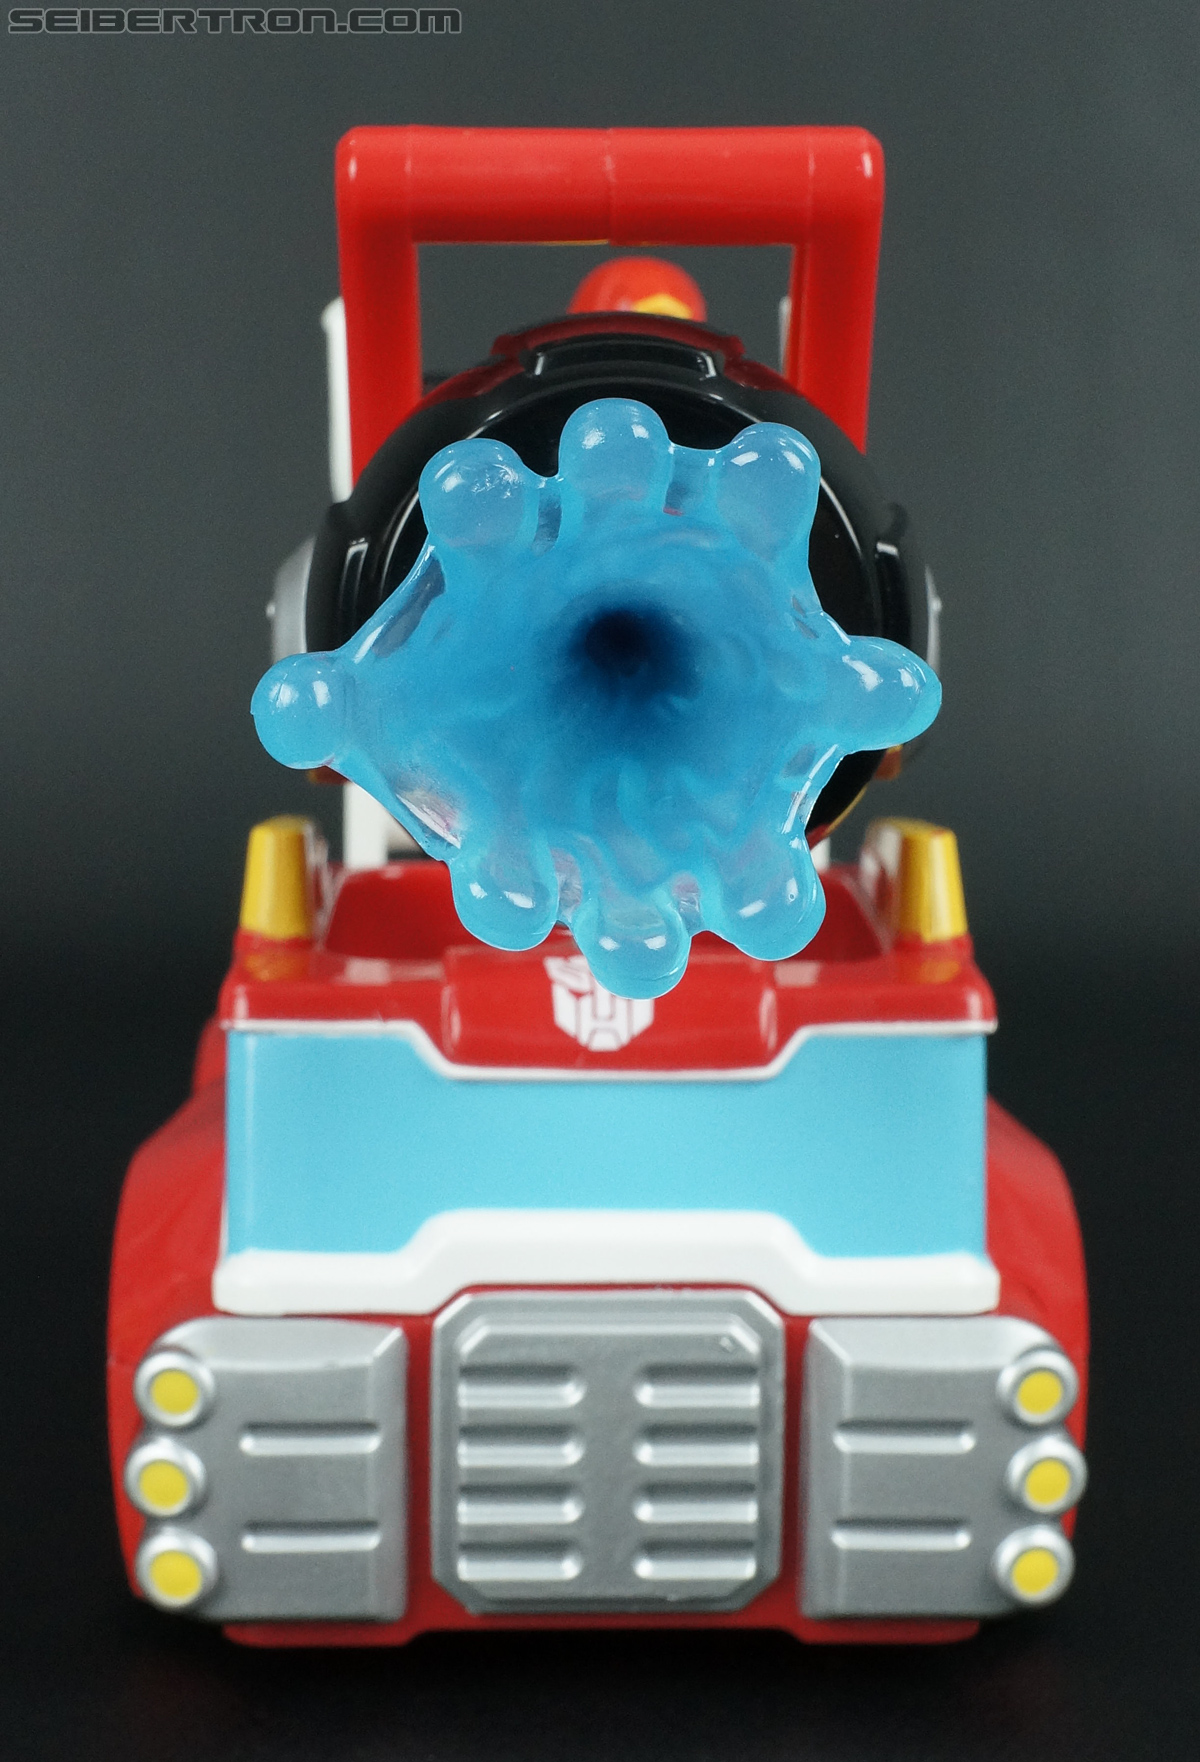 Transformers Rescue Bots Heatwave the Fire-Bot (Fire Station Prime) (Image #1 of 64)